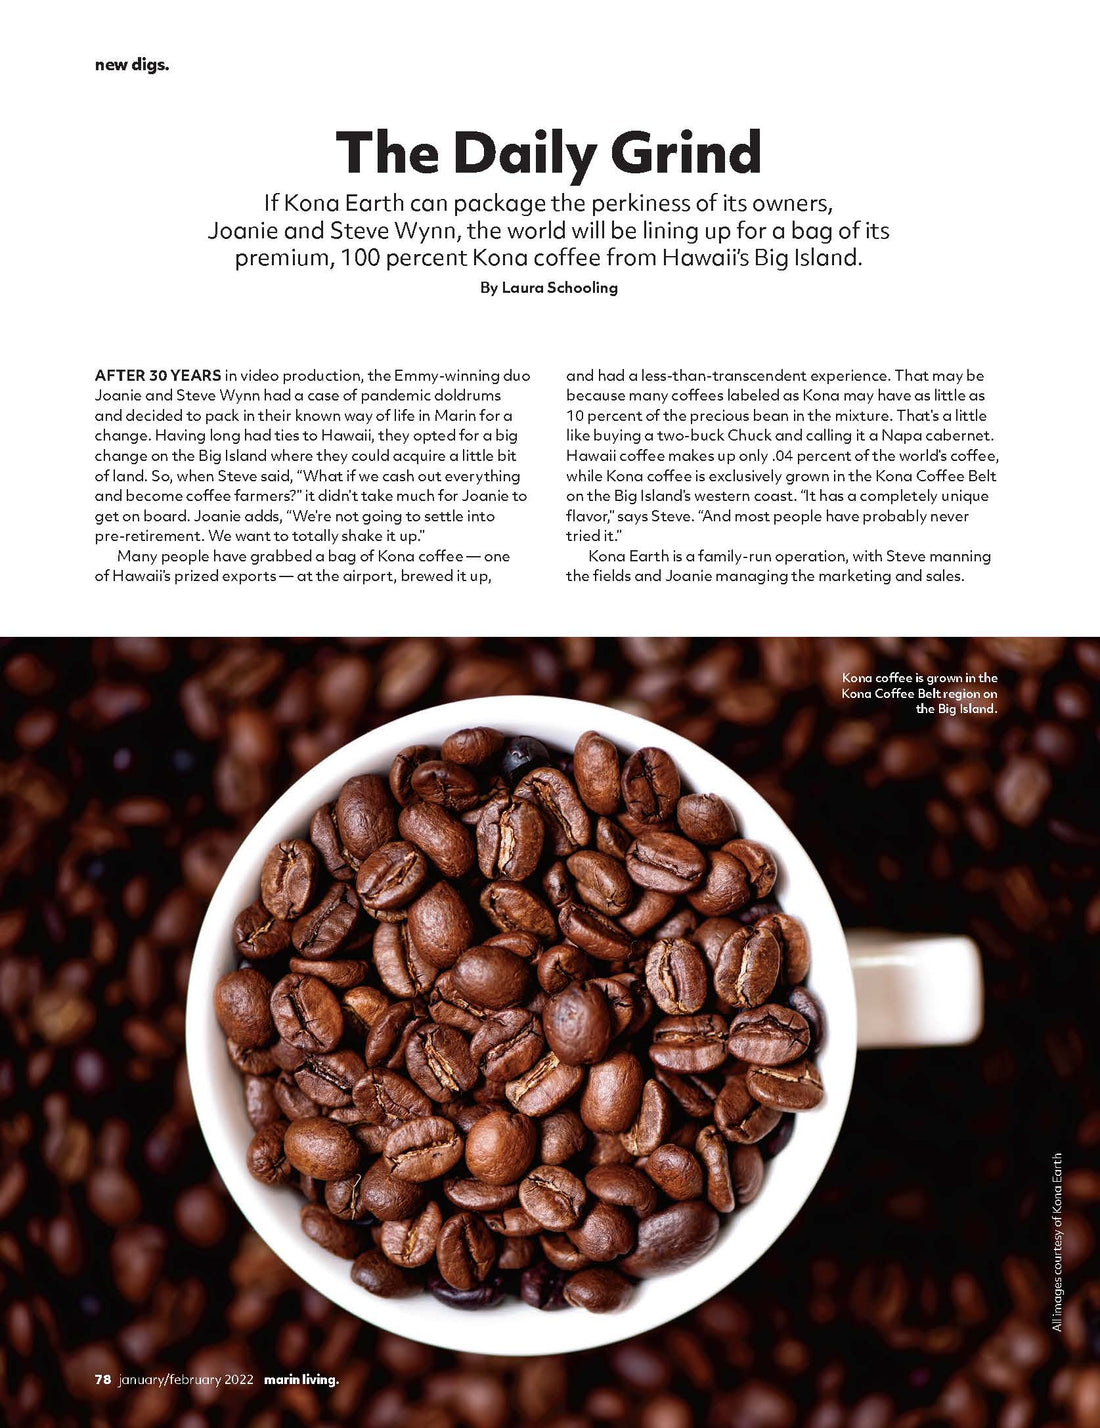 The Daily Grind article in Marin Living Magazine